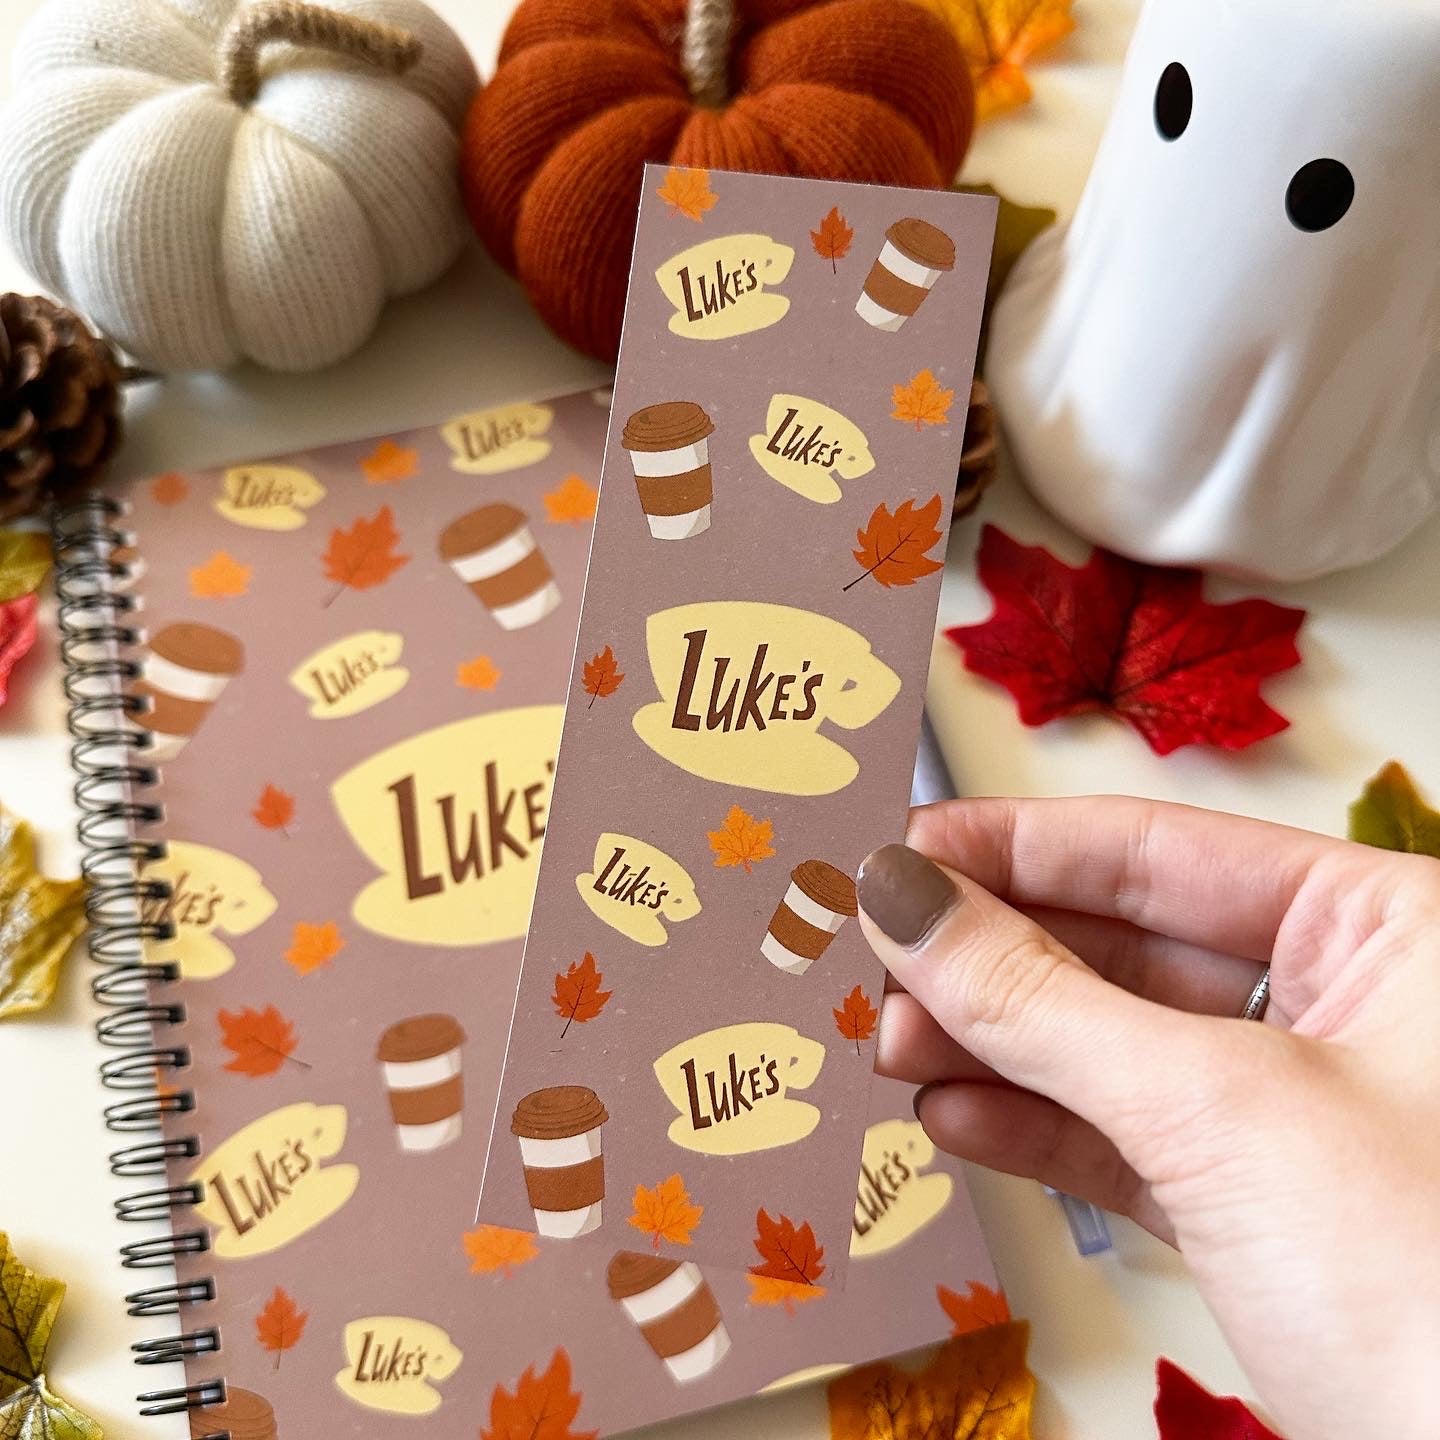 Stars Hollow Bookmarks